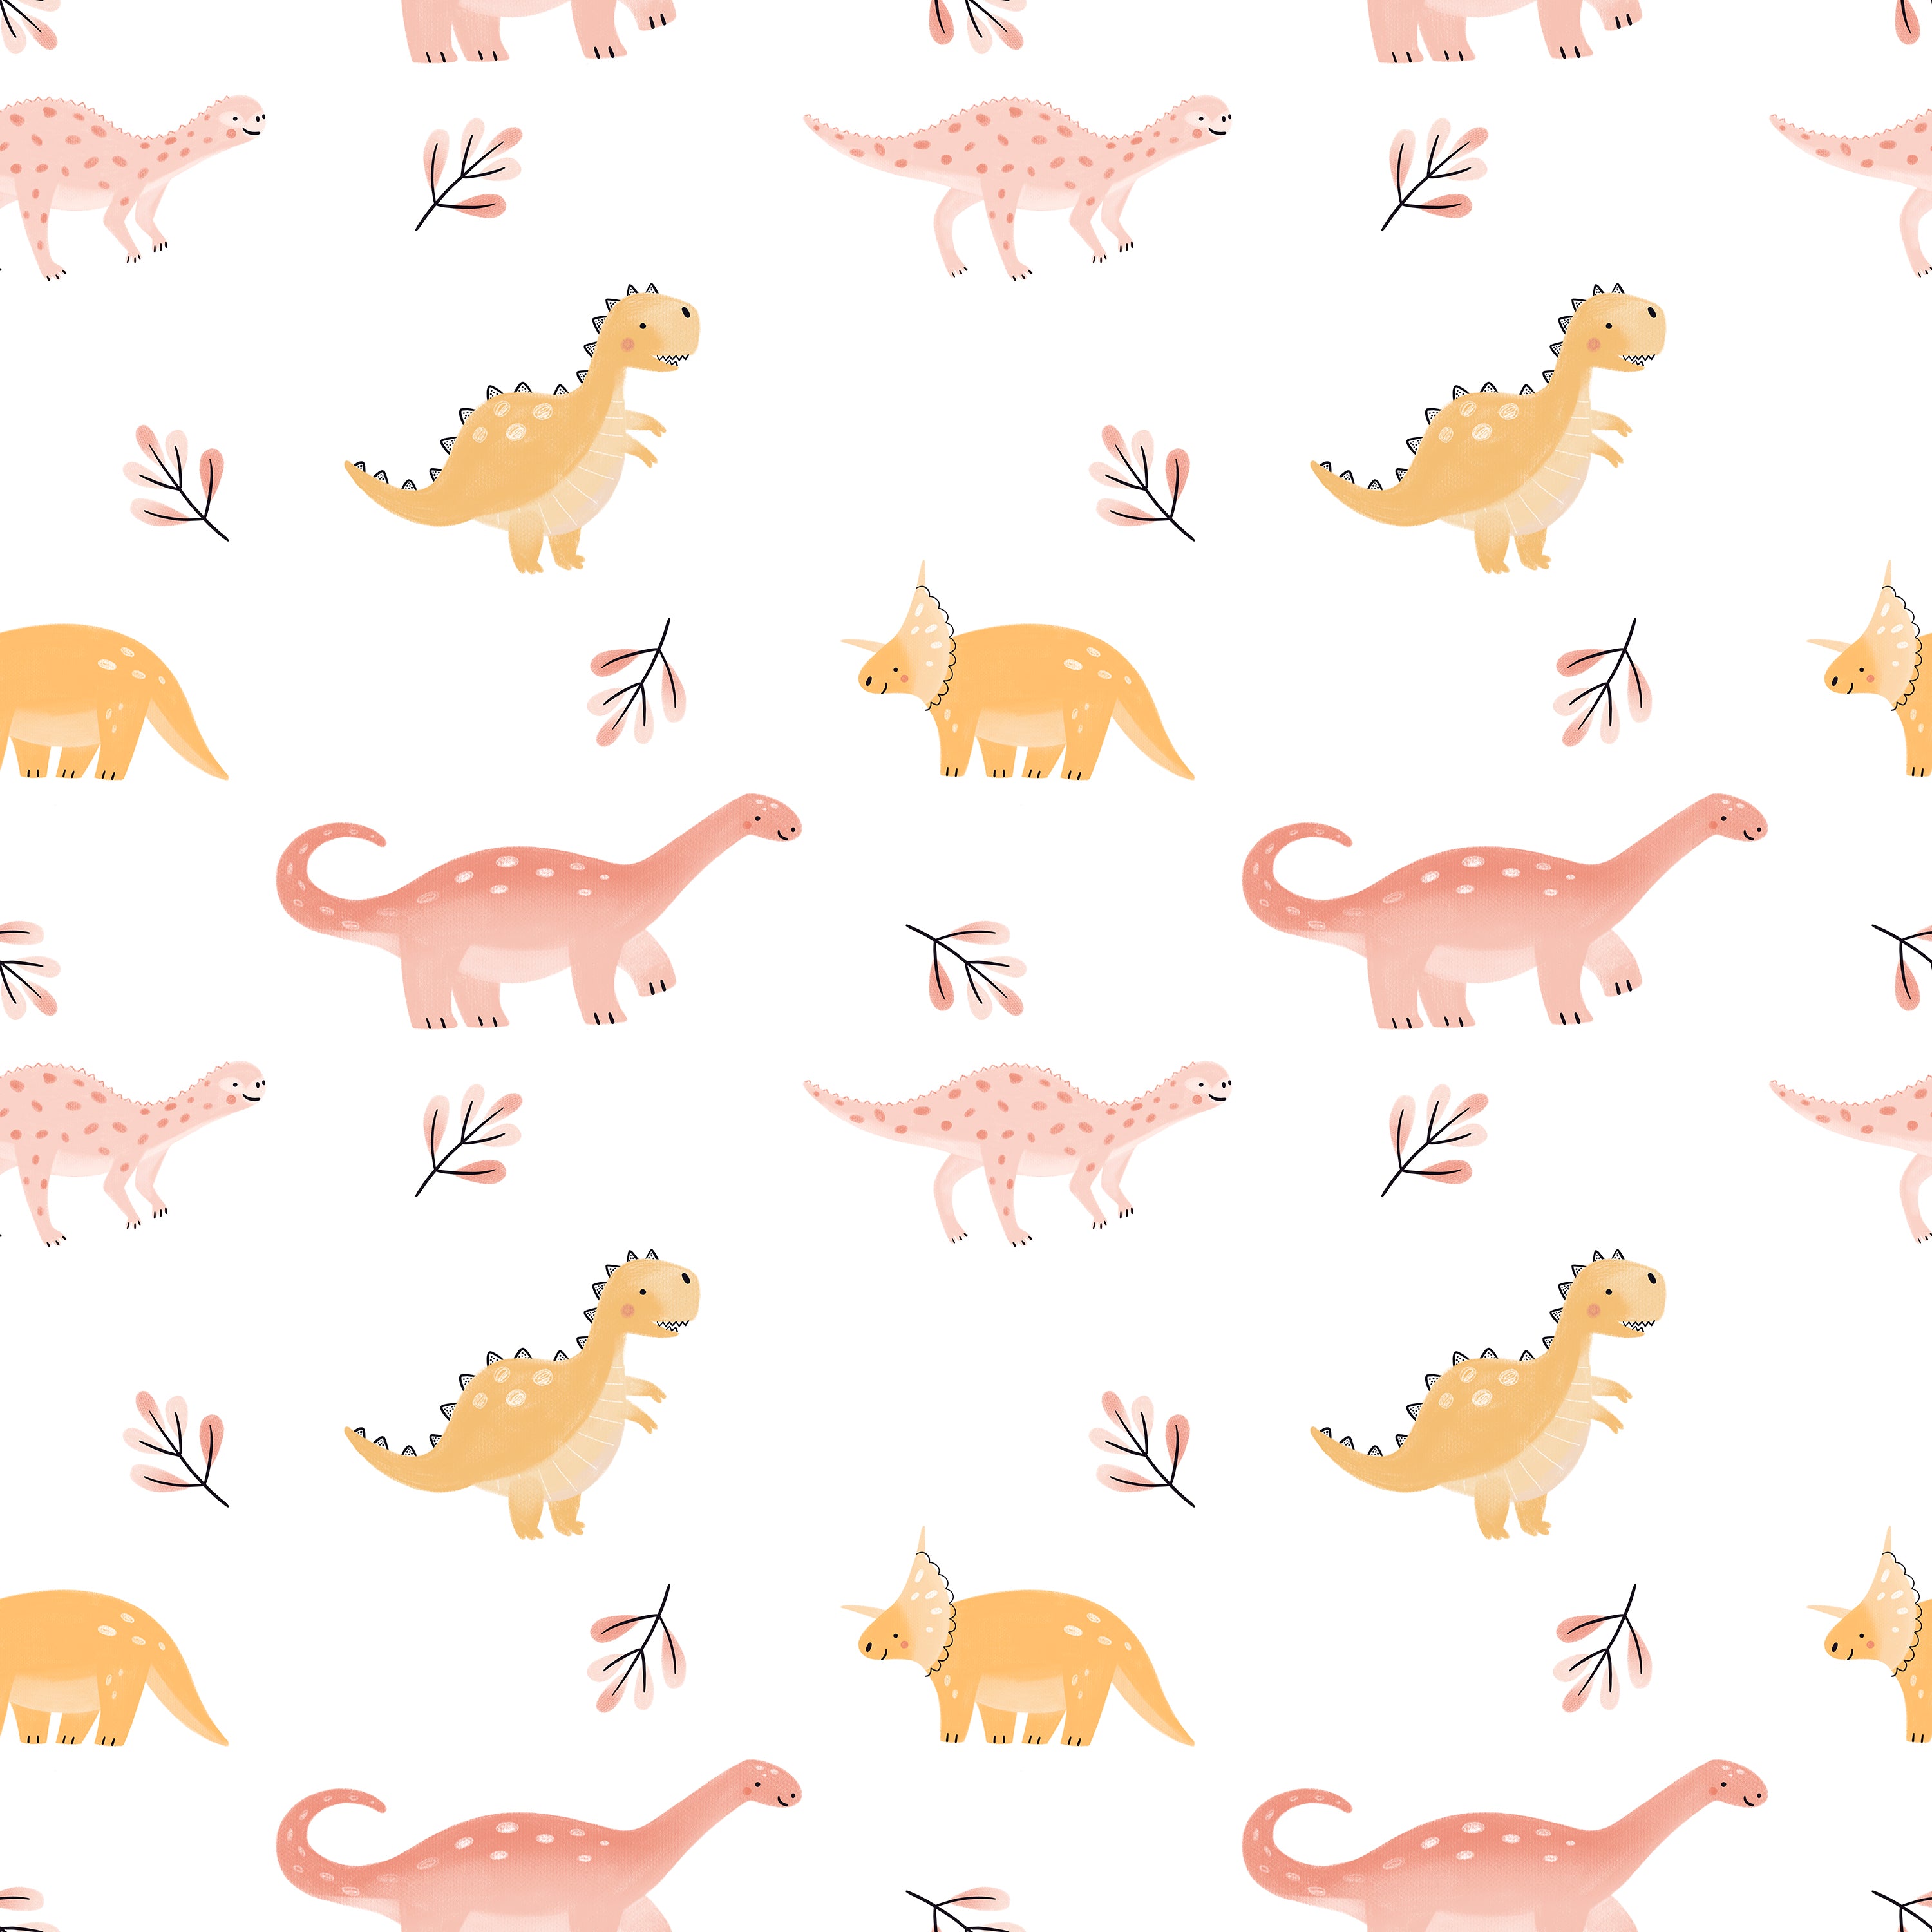 Close-up of Dino Days Wallpaper III with pastel dinosaurs and decorative leaves